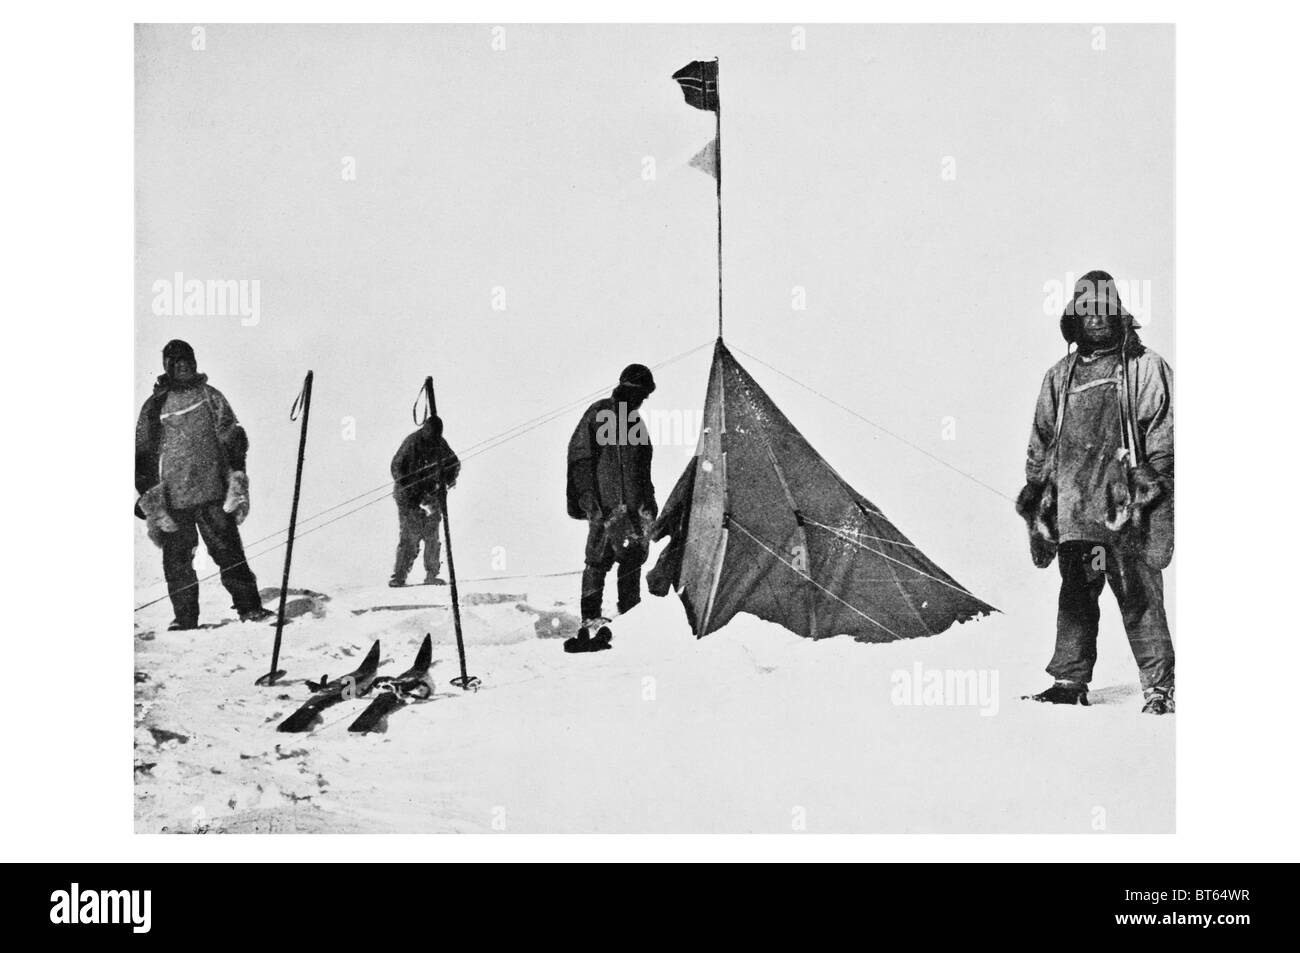 amundsens south pole camp ROBERT FALCON SCOTT at right find 19 January 1912 arctic CVO 6 June 1868 – 29 March 1912 Royal Navy of Stock Photo